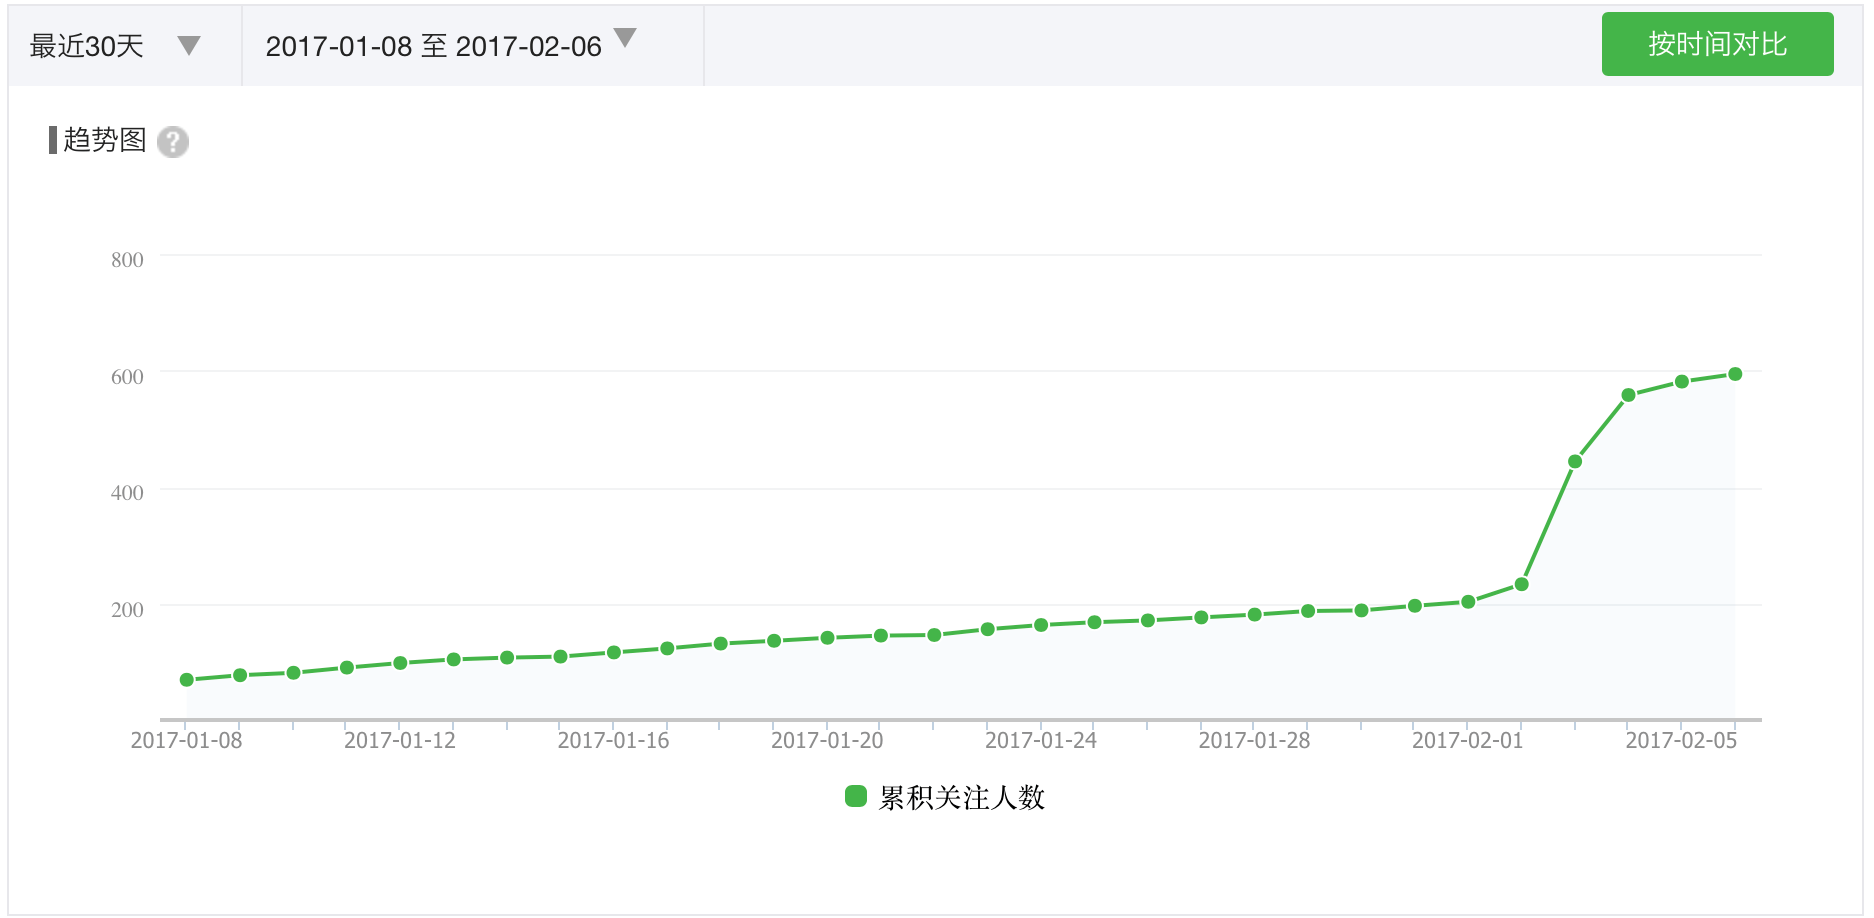 Trend of Followers Increase in the first month of a WeChat public account.